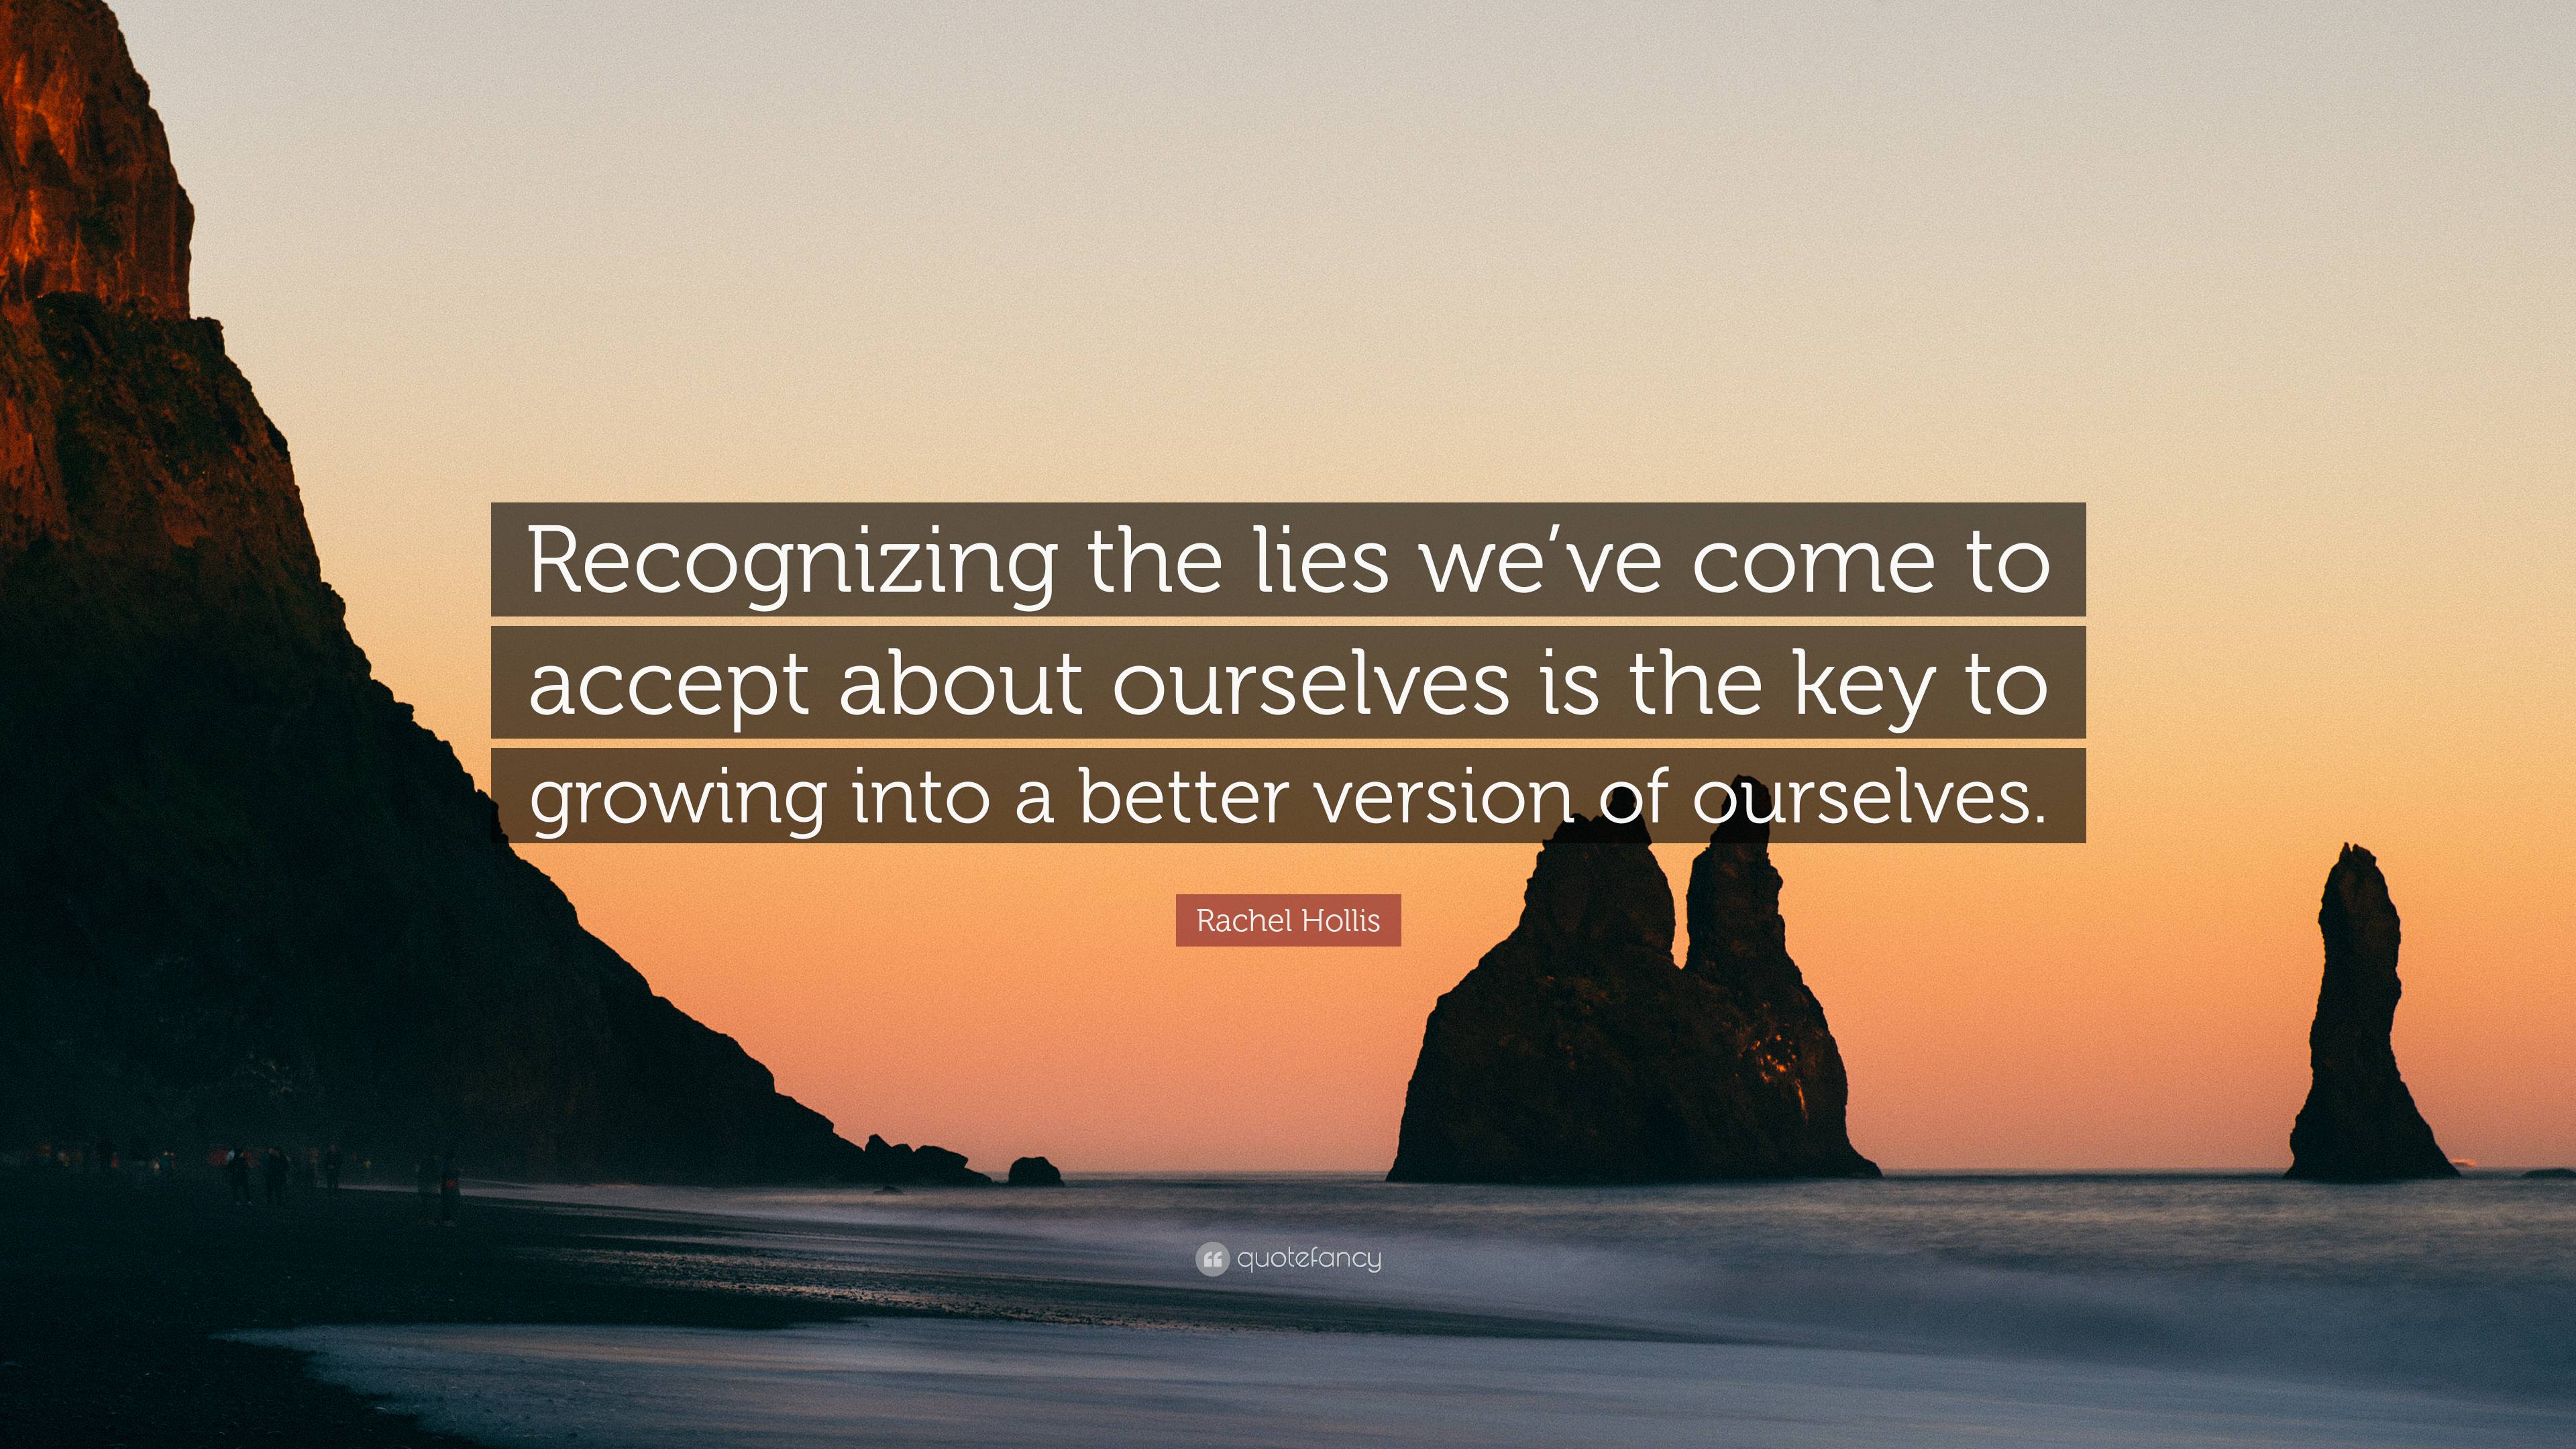 Rachel Hollis Quote: “Recognizing the lies we’ve come to accept about ...